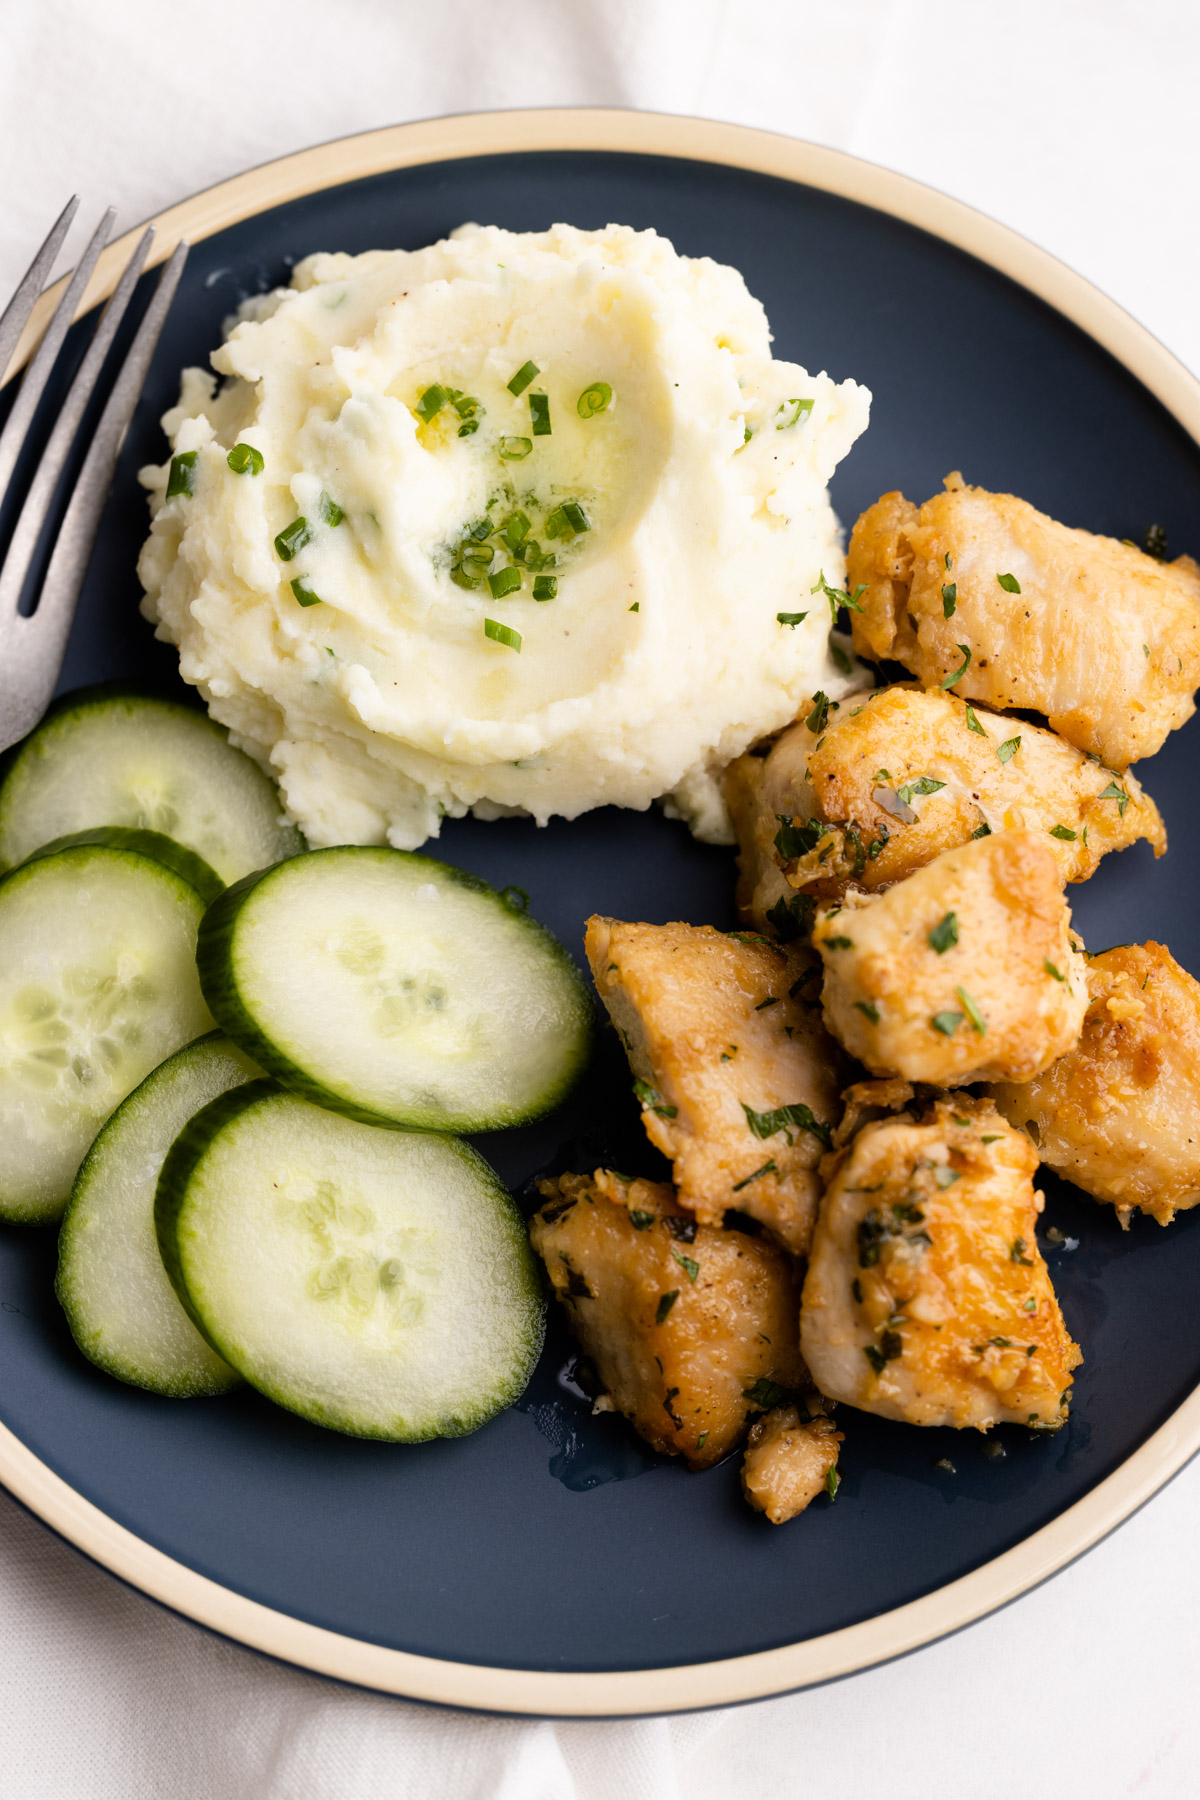 A plate of chicken with sour cream and onion mashed potatoes.